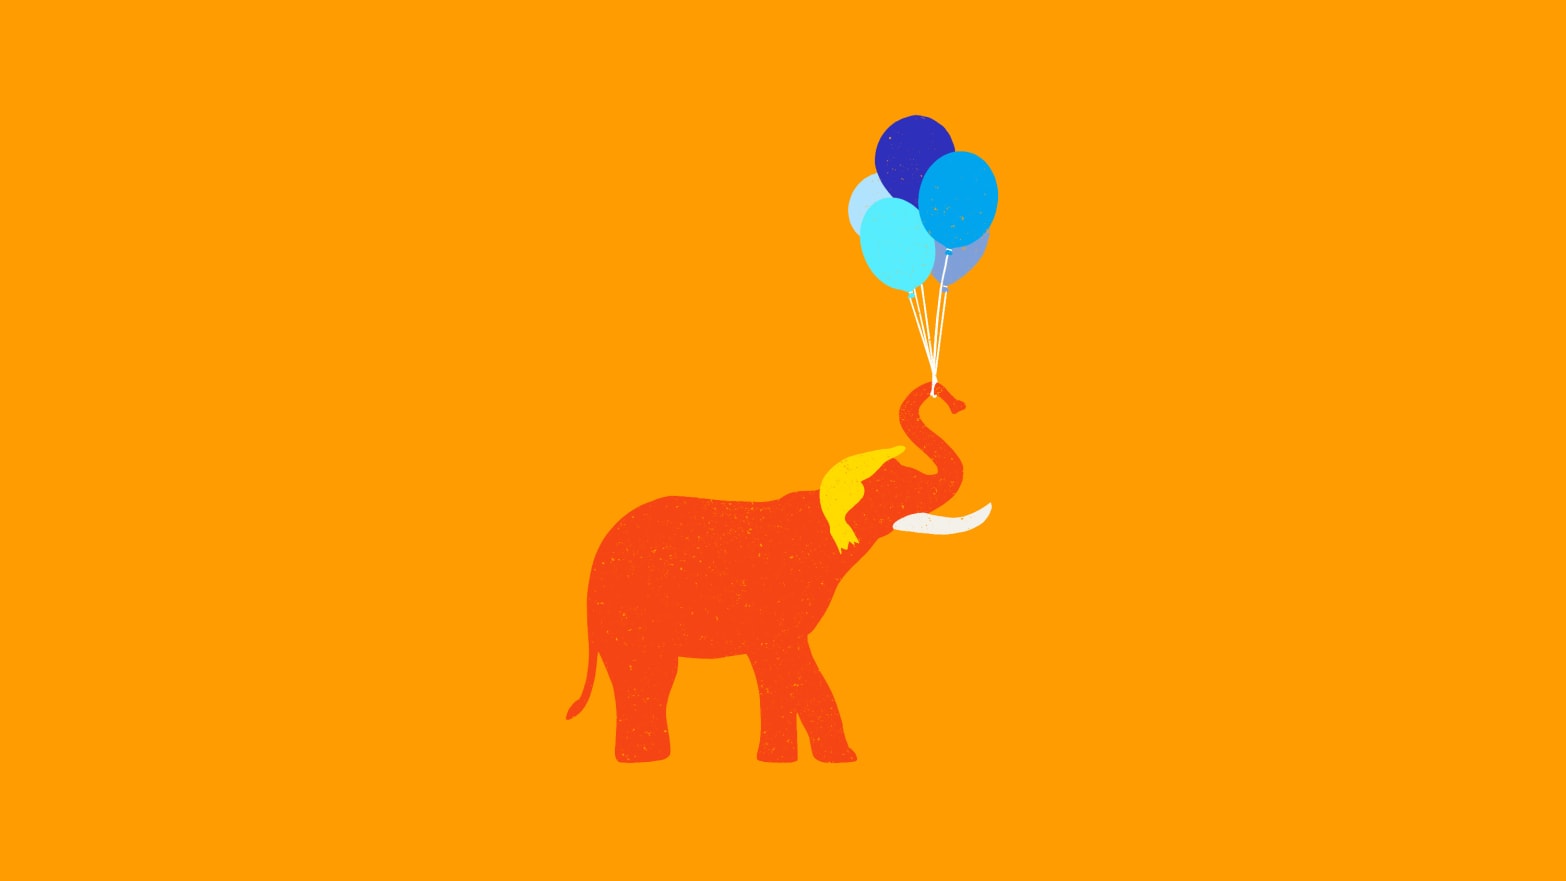 Silhouette of a red elephant on an orange background with yellow trump hair holding a bunch of balloons.